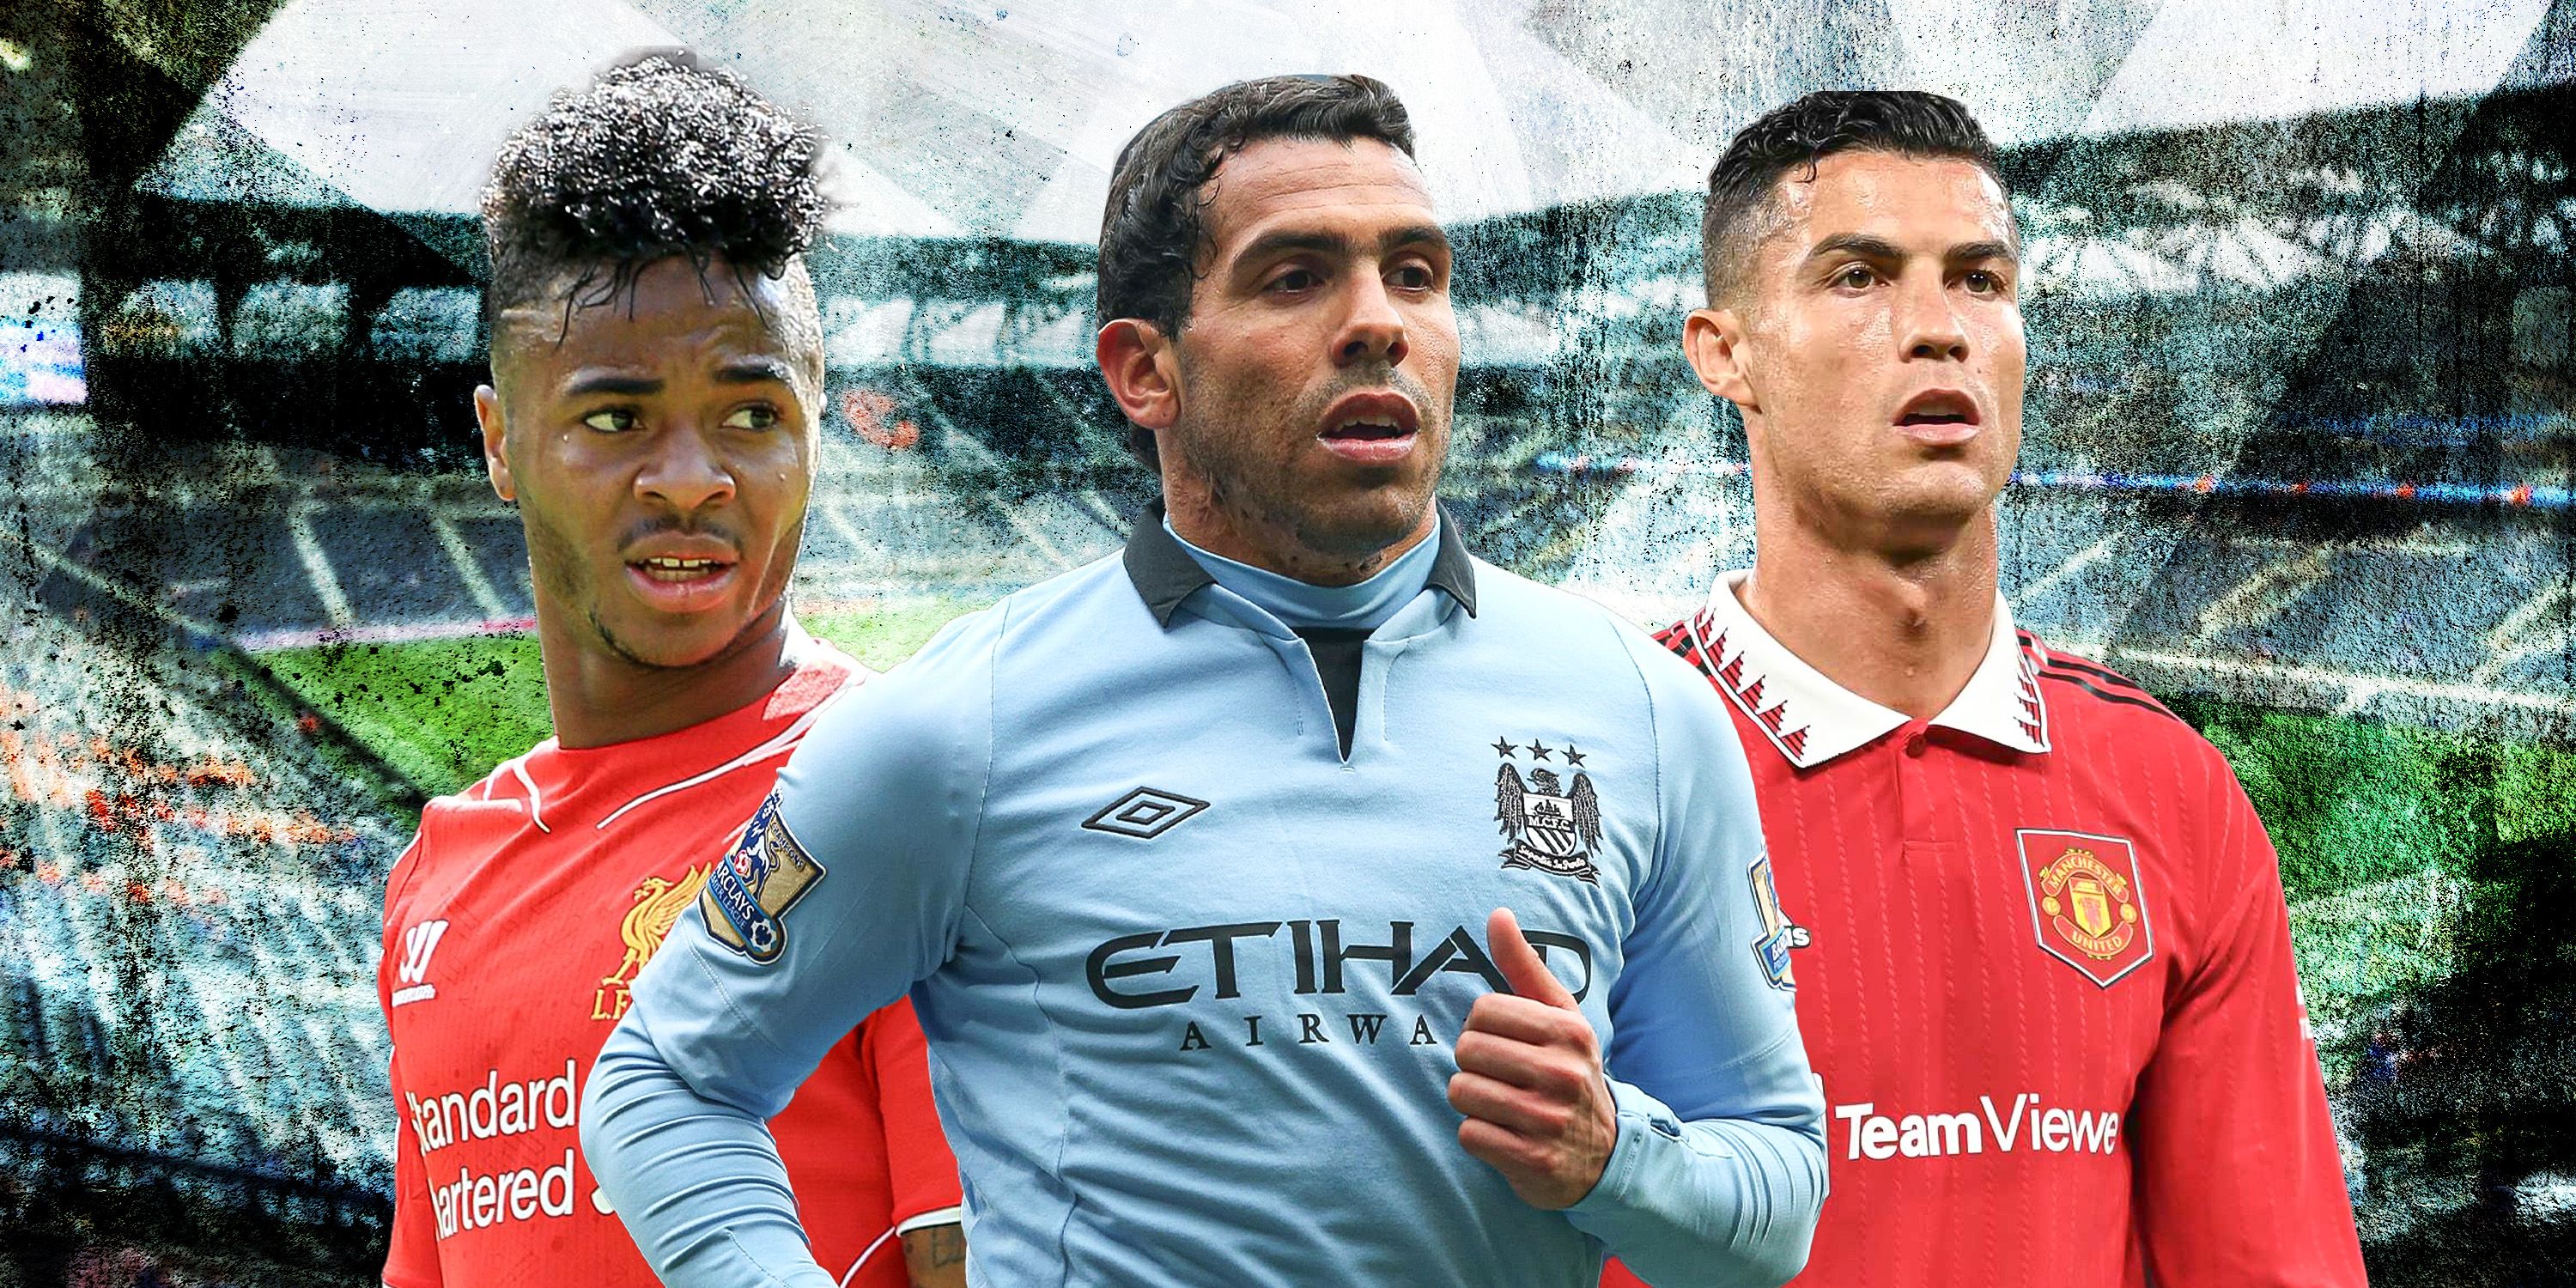 Liverpool's Raheem Sterling, Manchester City's Carlos Tevez, and Manchester United's Cristiano Ronaldo.